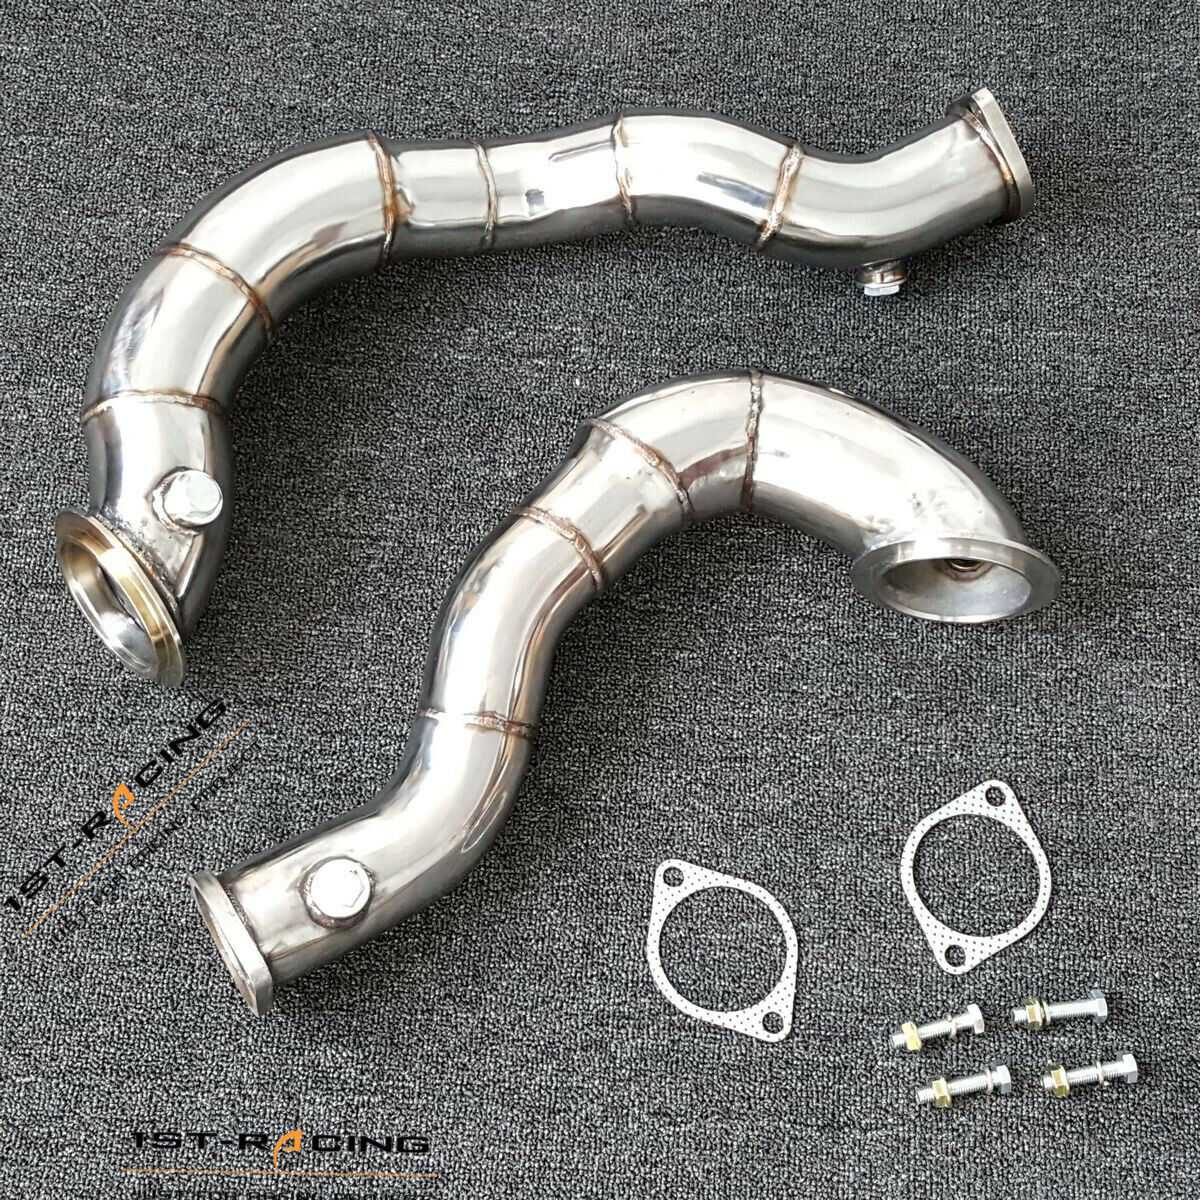 3″ Stainless Steel Turbo Exhaust Tube For 07-11 BMW N54 335xi E90/E92 3.0L